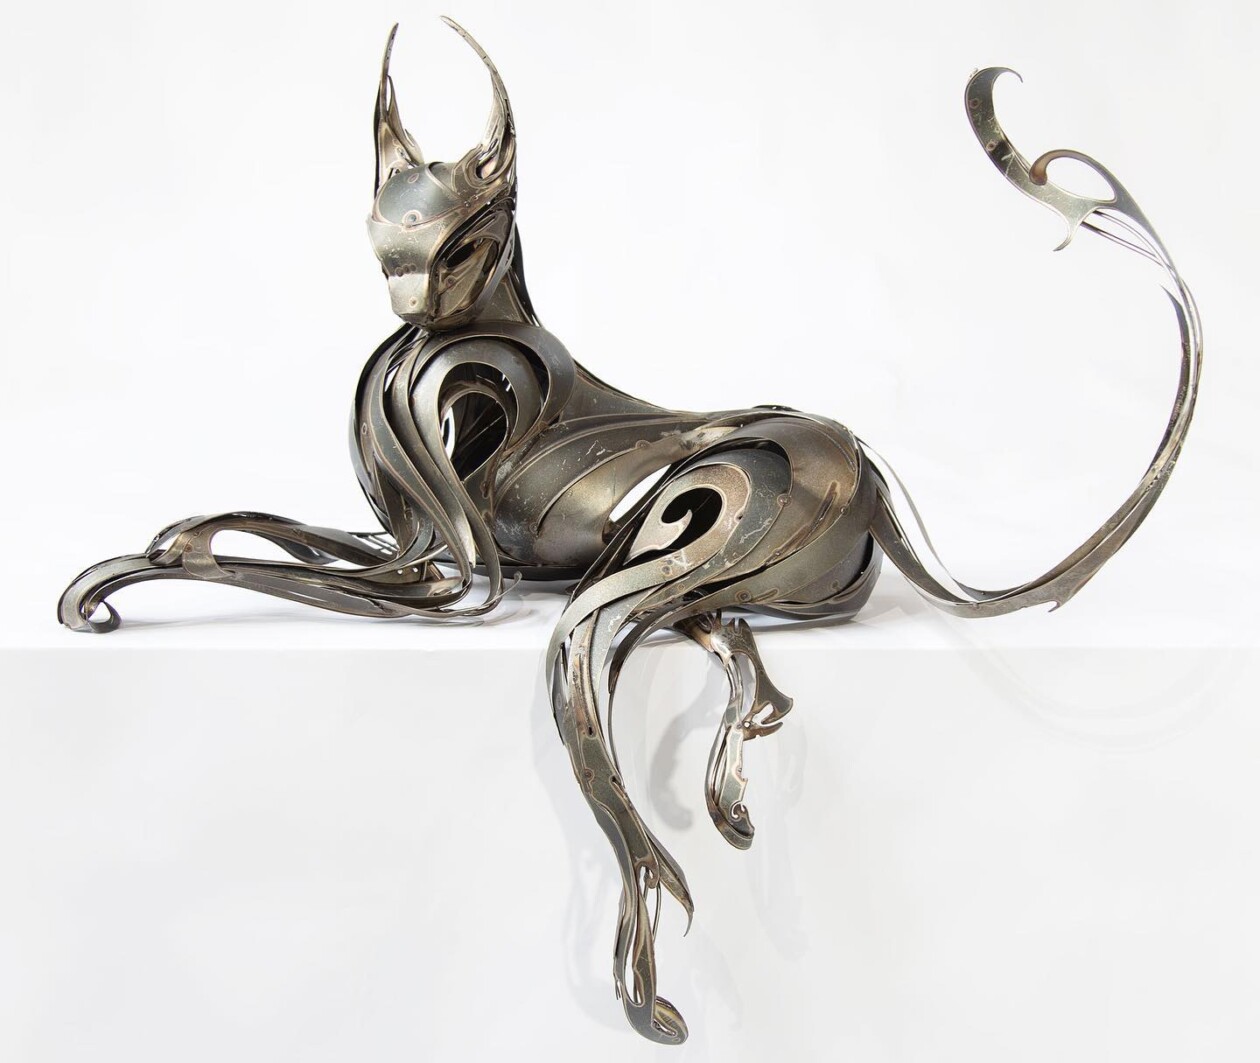 Magnificent Metallic Animal Sculptures Made With Sweeping Lines By Georgie Seccull 24